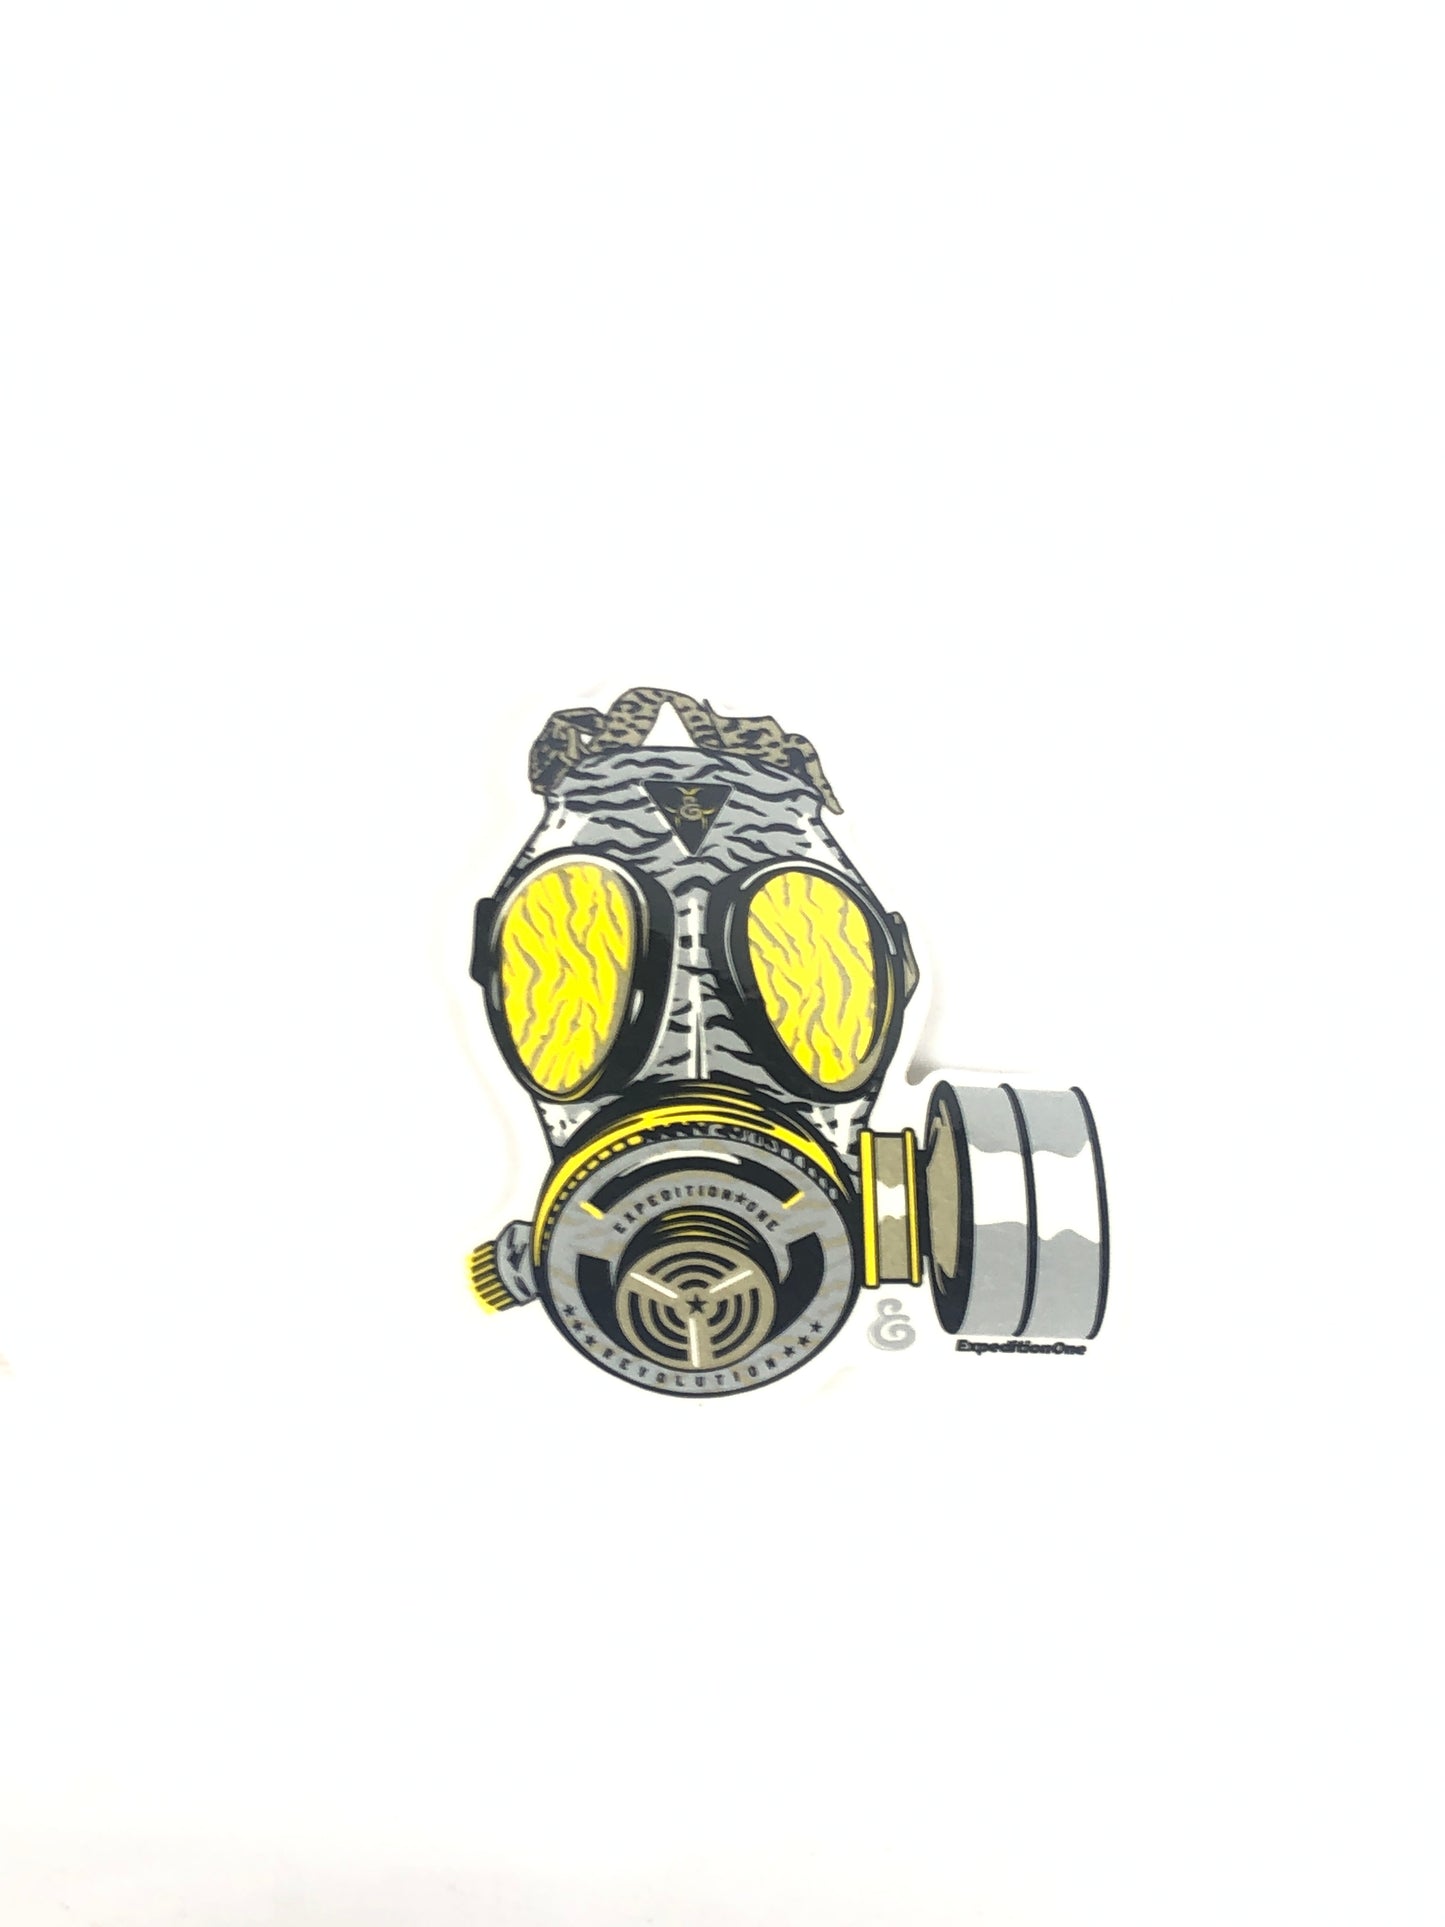 Expedition One Gas Mask Revolution Clear Silver Yellow 5.5" x 5" Sticker